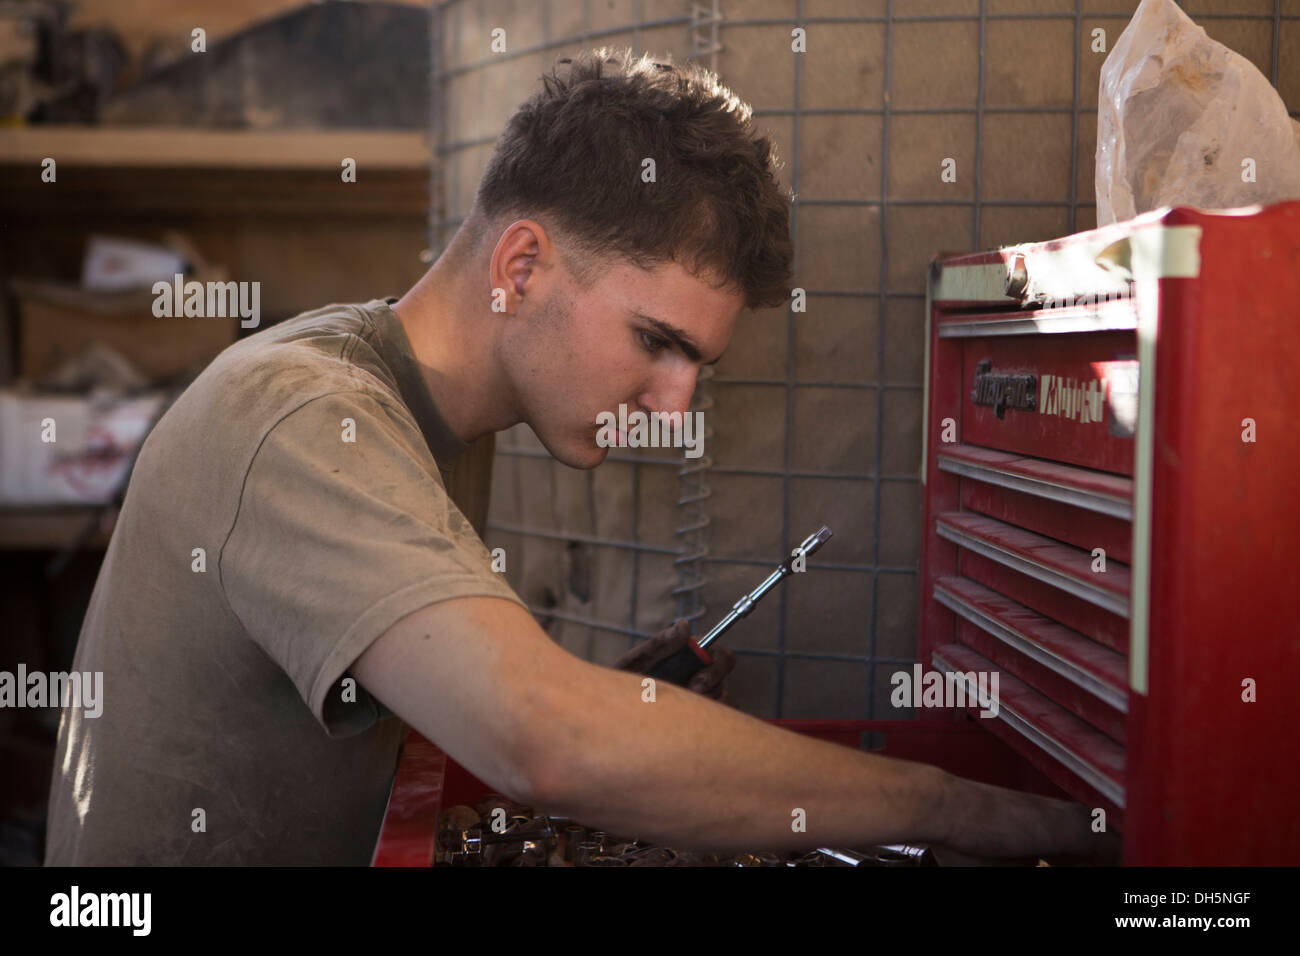 U.S. Marine Corps Lance Cpl. Alex Thomason, a motor transport mechanic with Lima Company, 3rd Battalion, 7th Marine Regiment, selects the proper tool to repair a M1114 High Mobility Multipurpose Wheeled Vehicle at Forward Operating Base (FOB) Zeebrugge, K Stock Photo